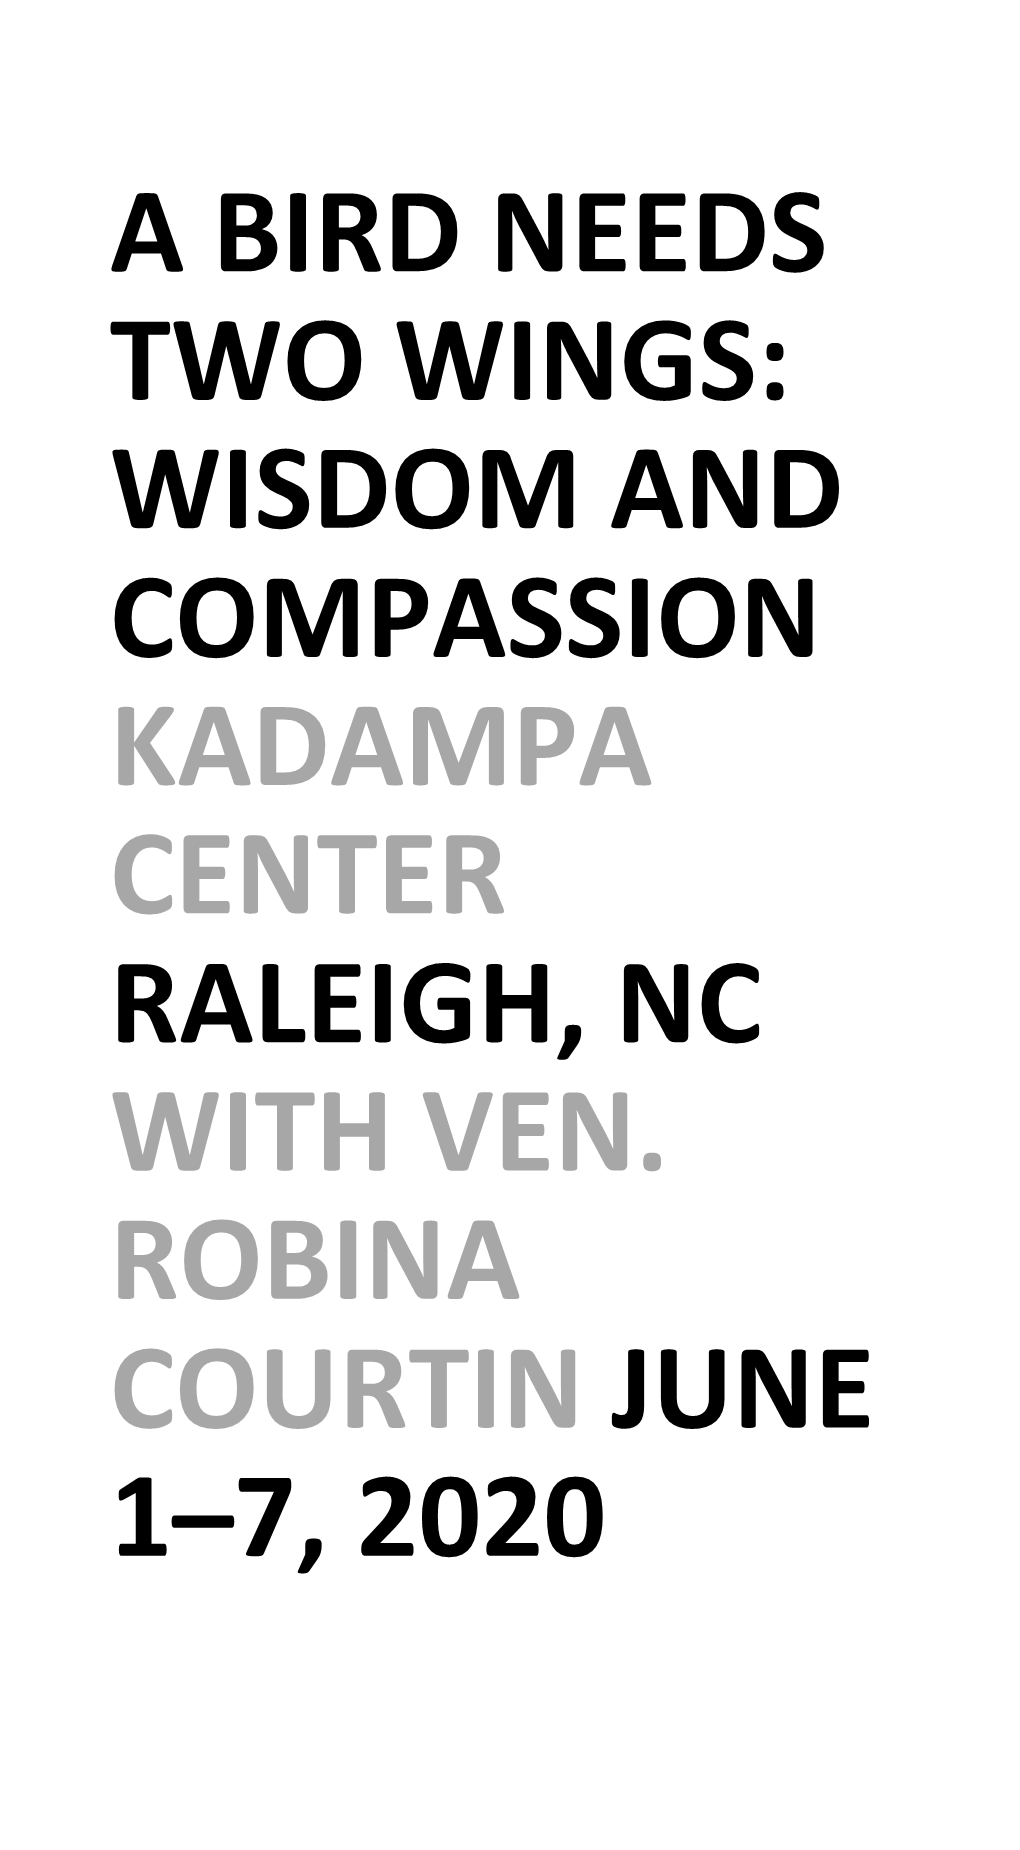 A Bird Needs Two Wings: Wisdom and Compassion Kadampa Center Raleigh, Nc with Ven